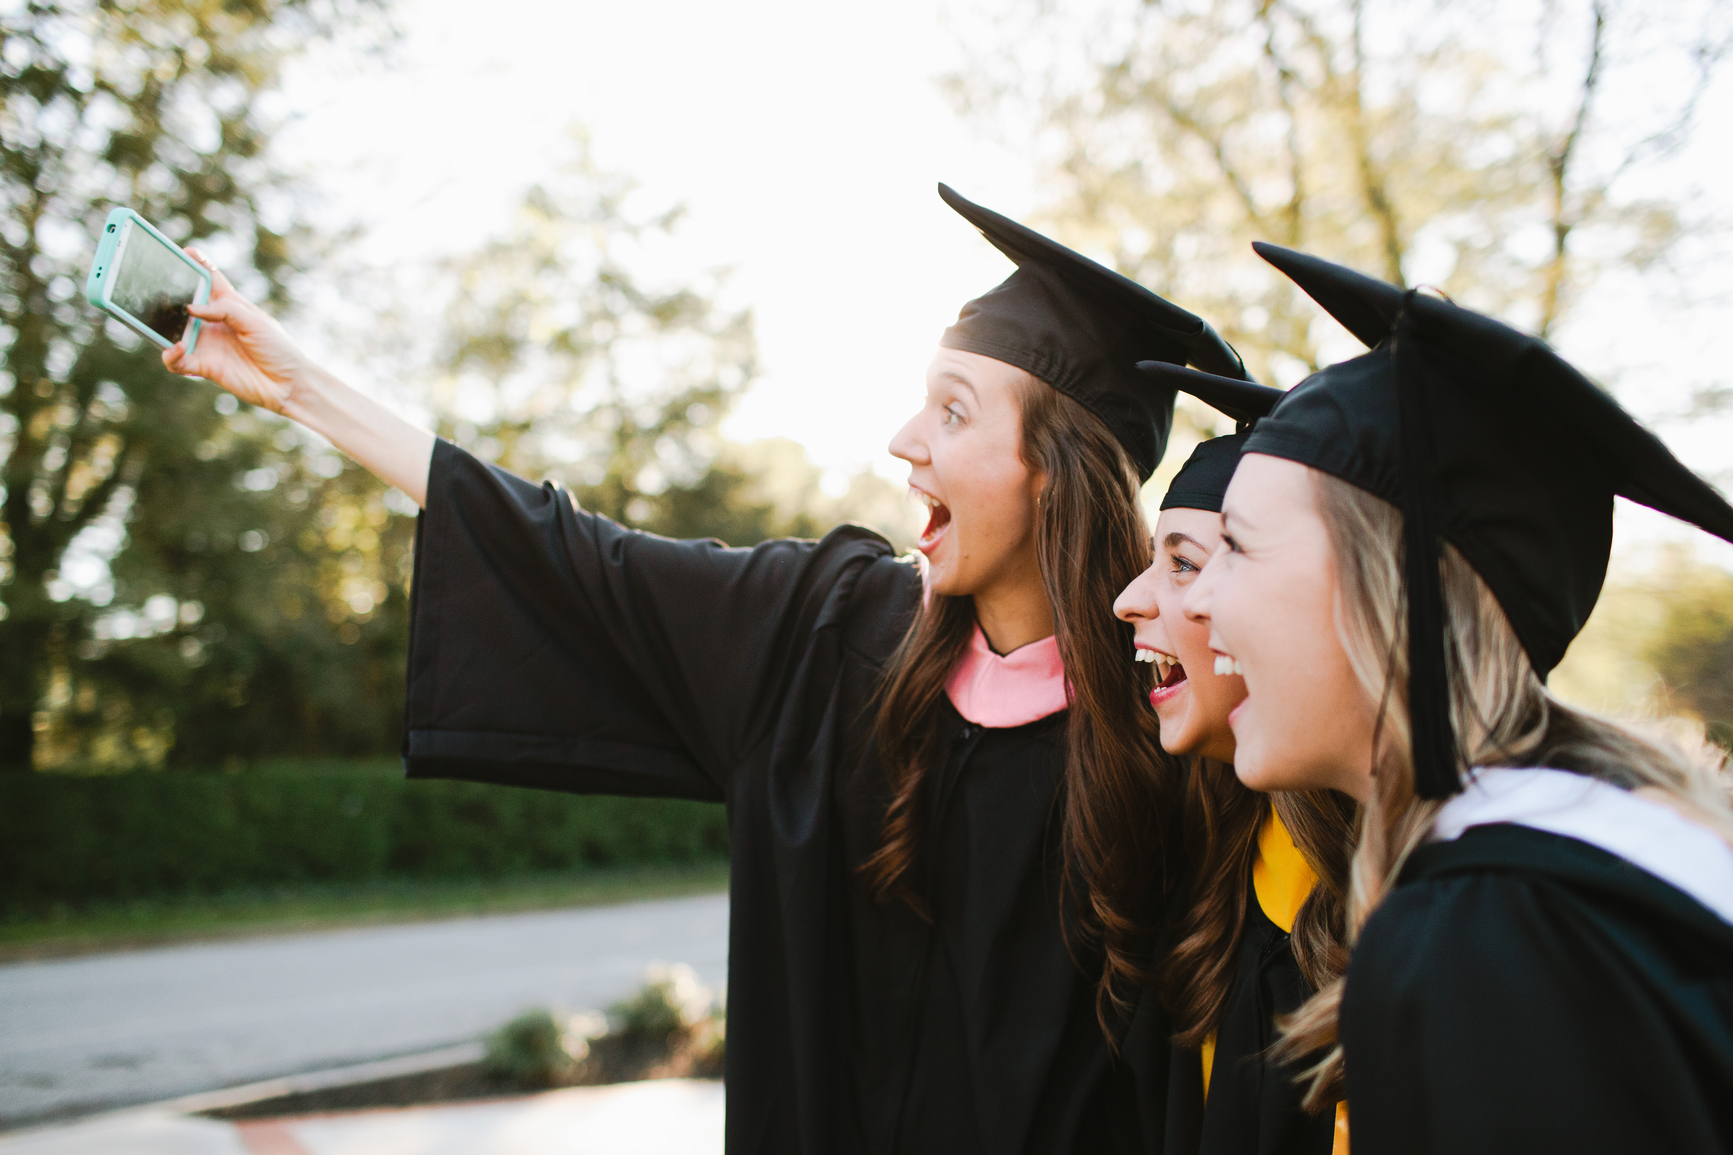 Young women in graduation gowns